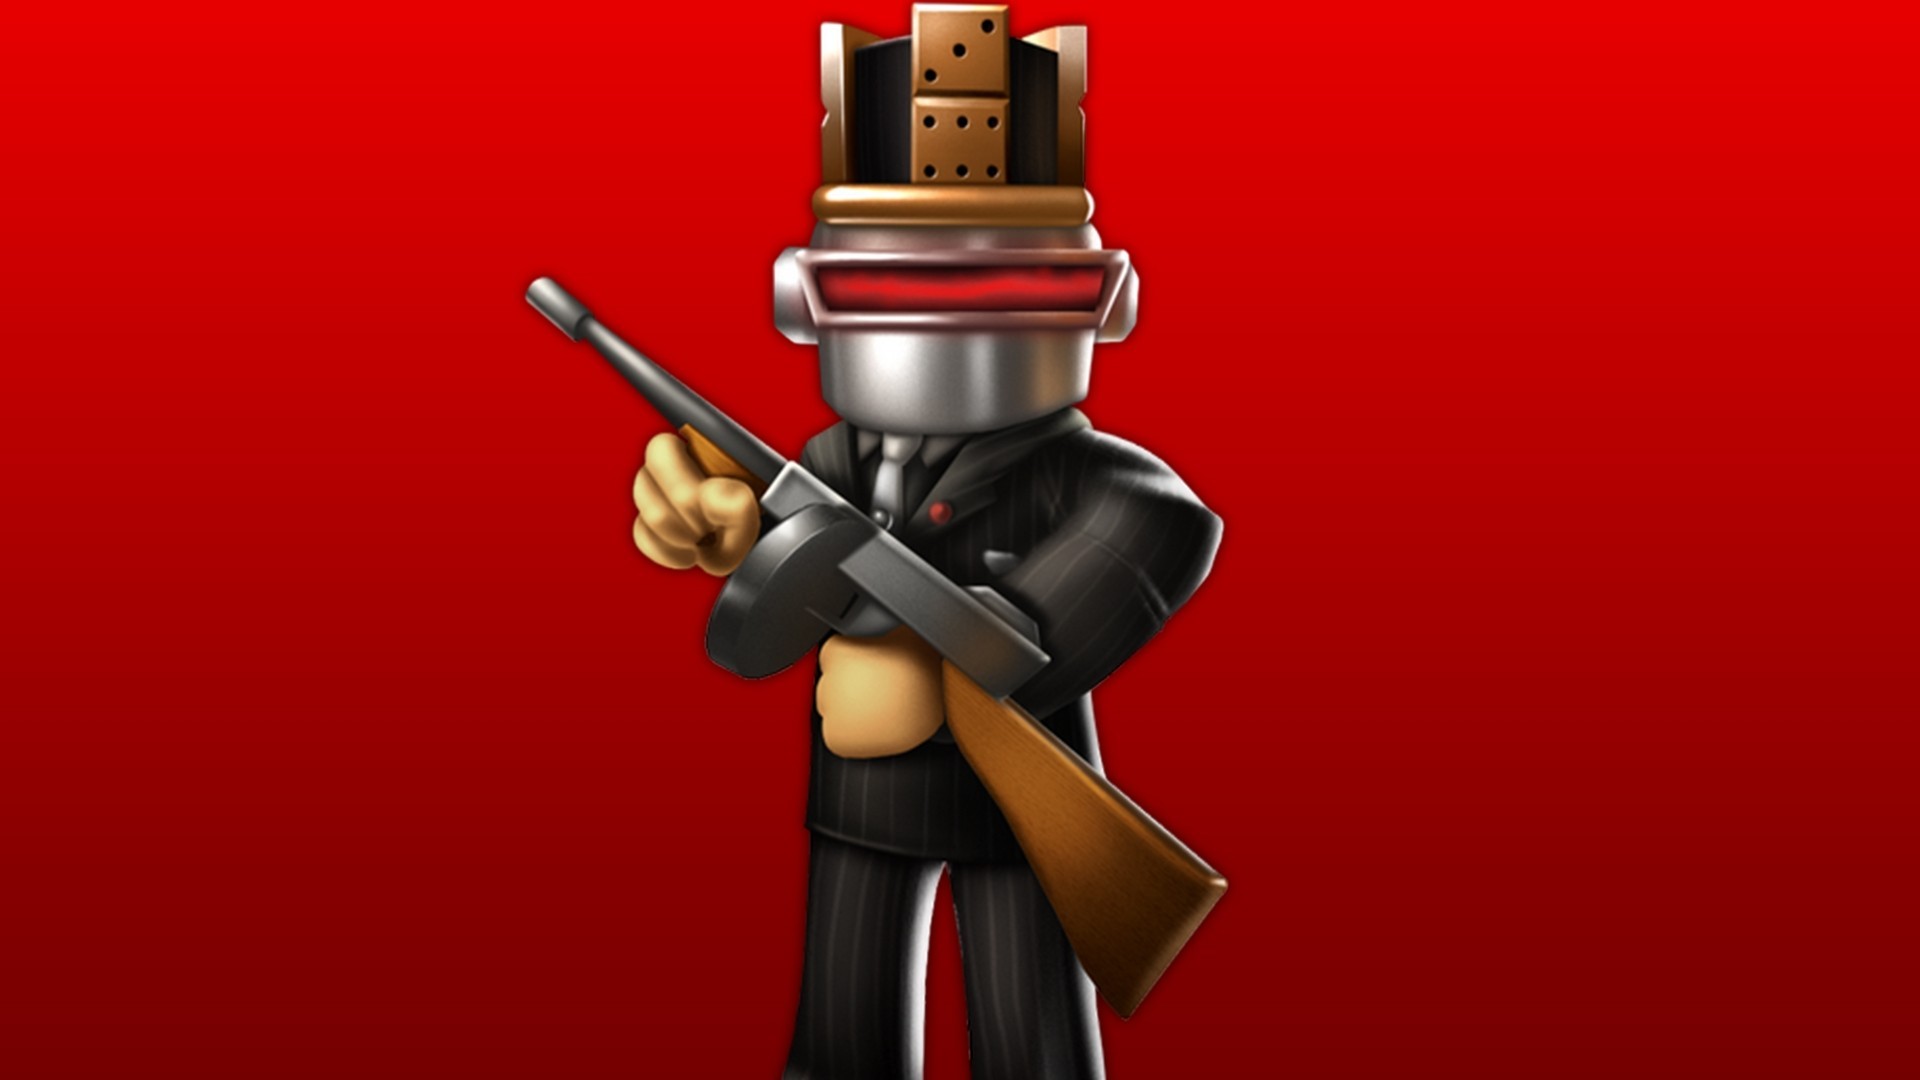 Free Cool Roblox Games Chrome Extension Hd Wallpaper Theme Tab For Chrome Browser - roblox game wallpaper for new tab